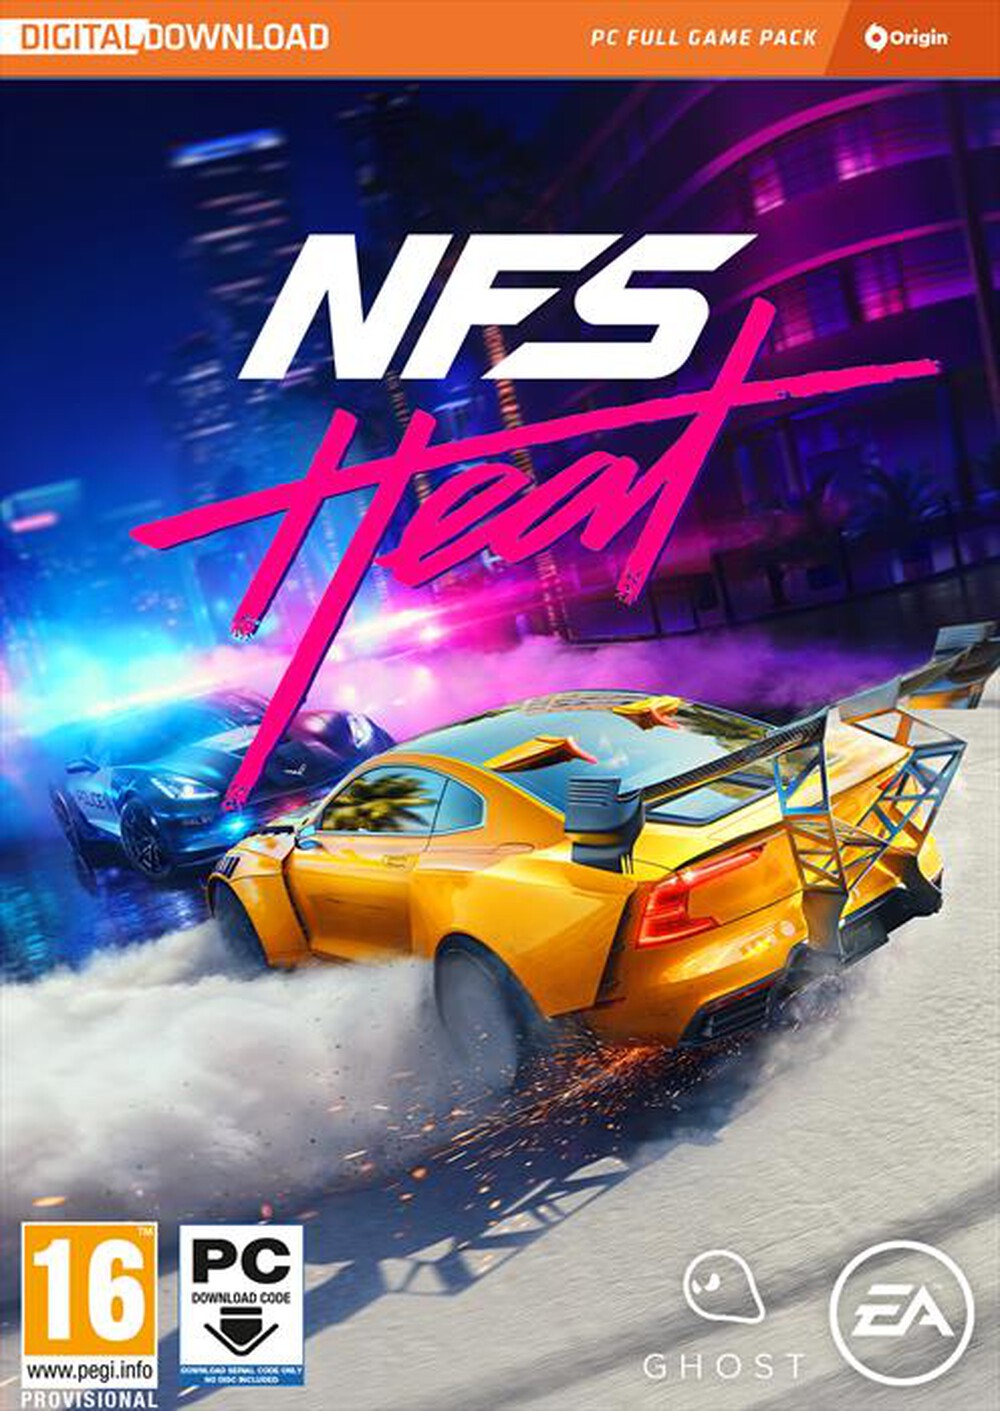 "ELECTRONIC ARTS - NEED FOR SPEED HEAT PC"